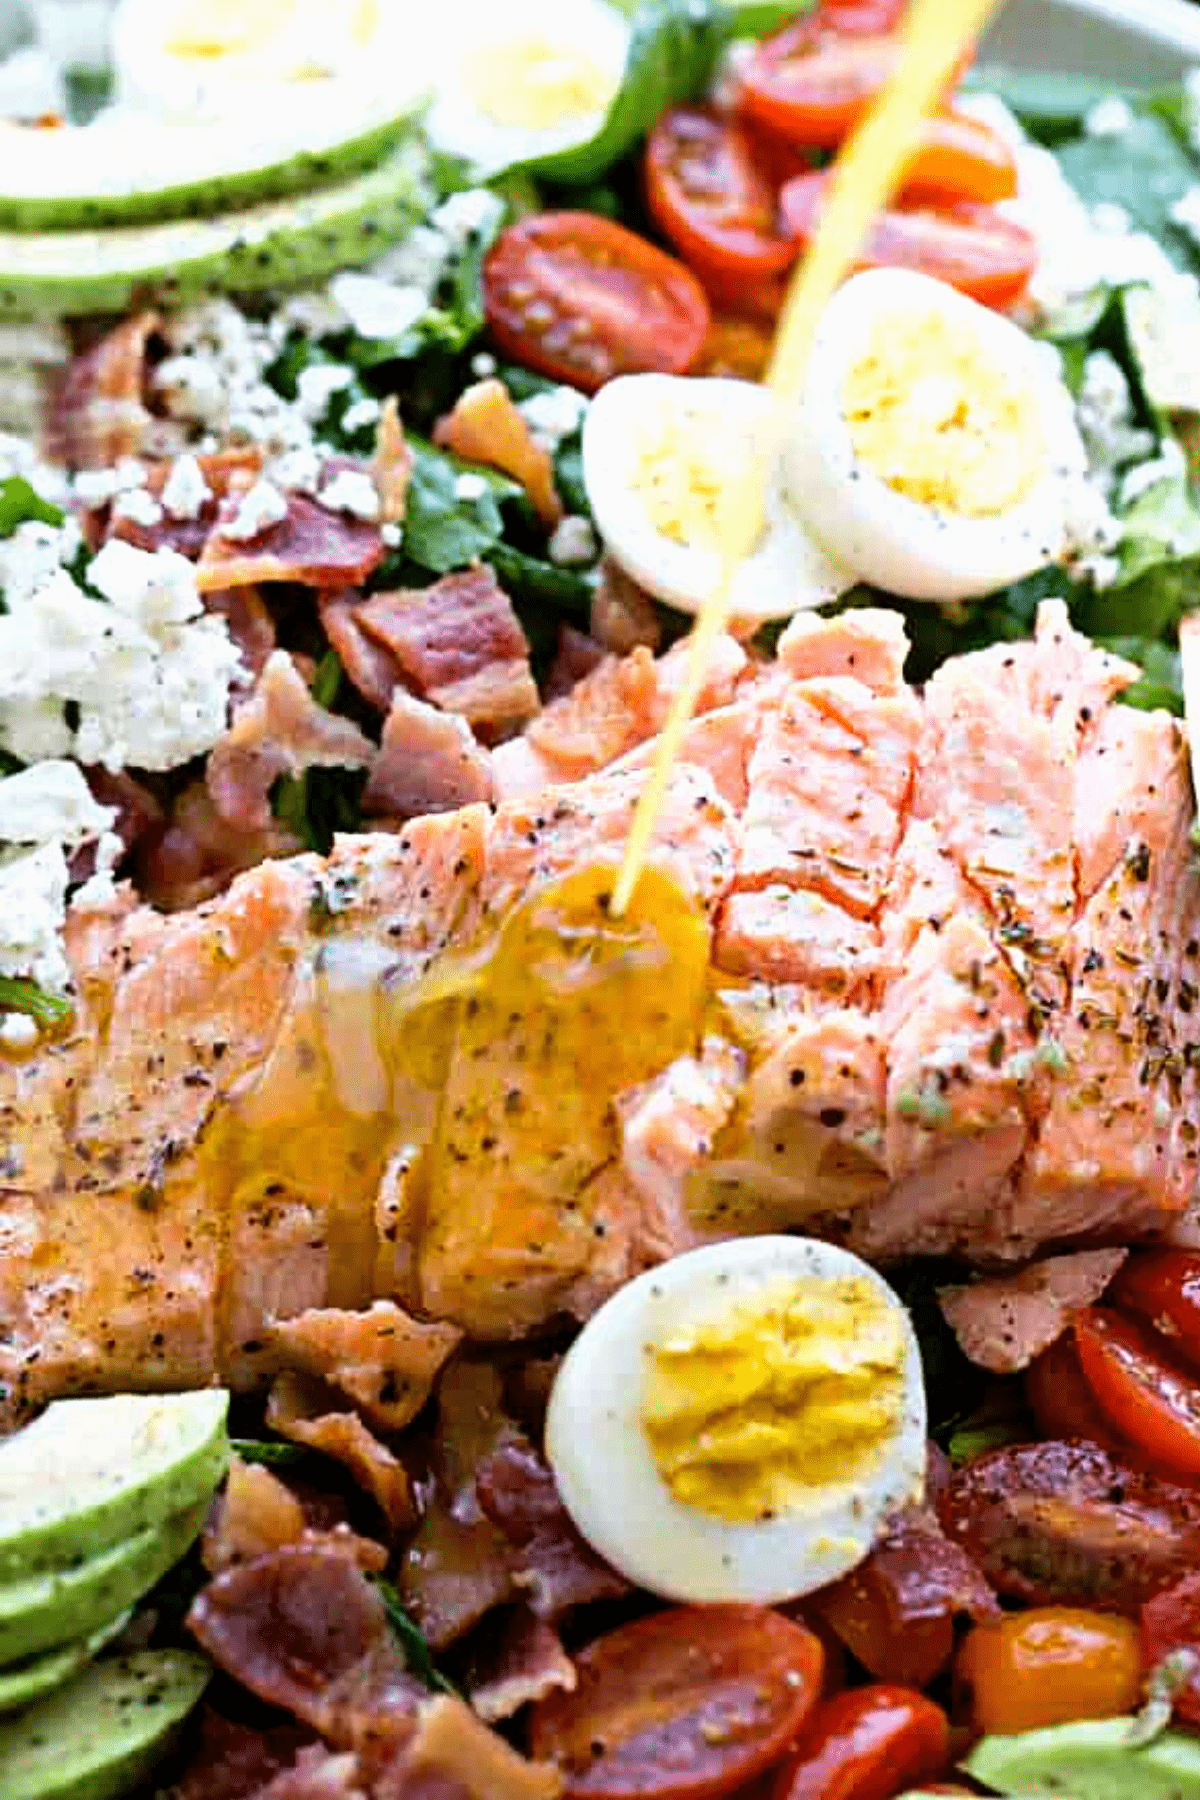 pouring salad dressing over a salmon fillet surrounded by halved boiled eggs, crumbles of bacon, salad greens, cherry tomatoes, and sliced avocado.